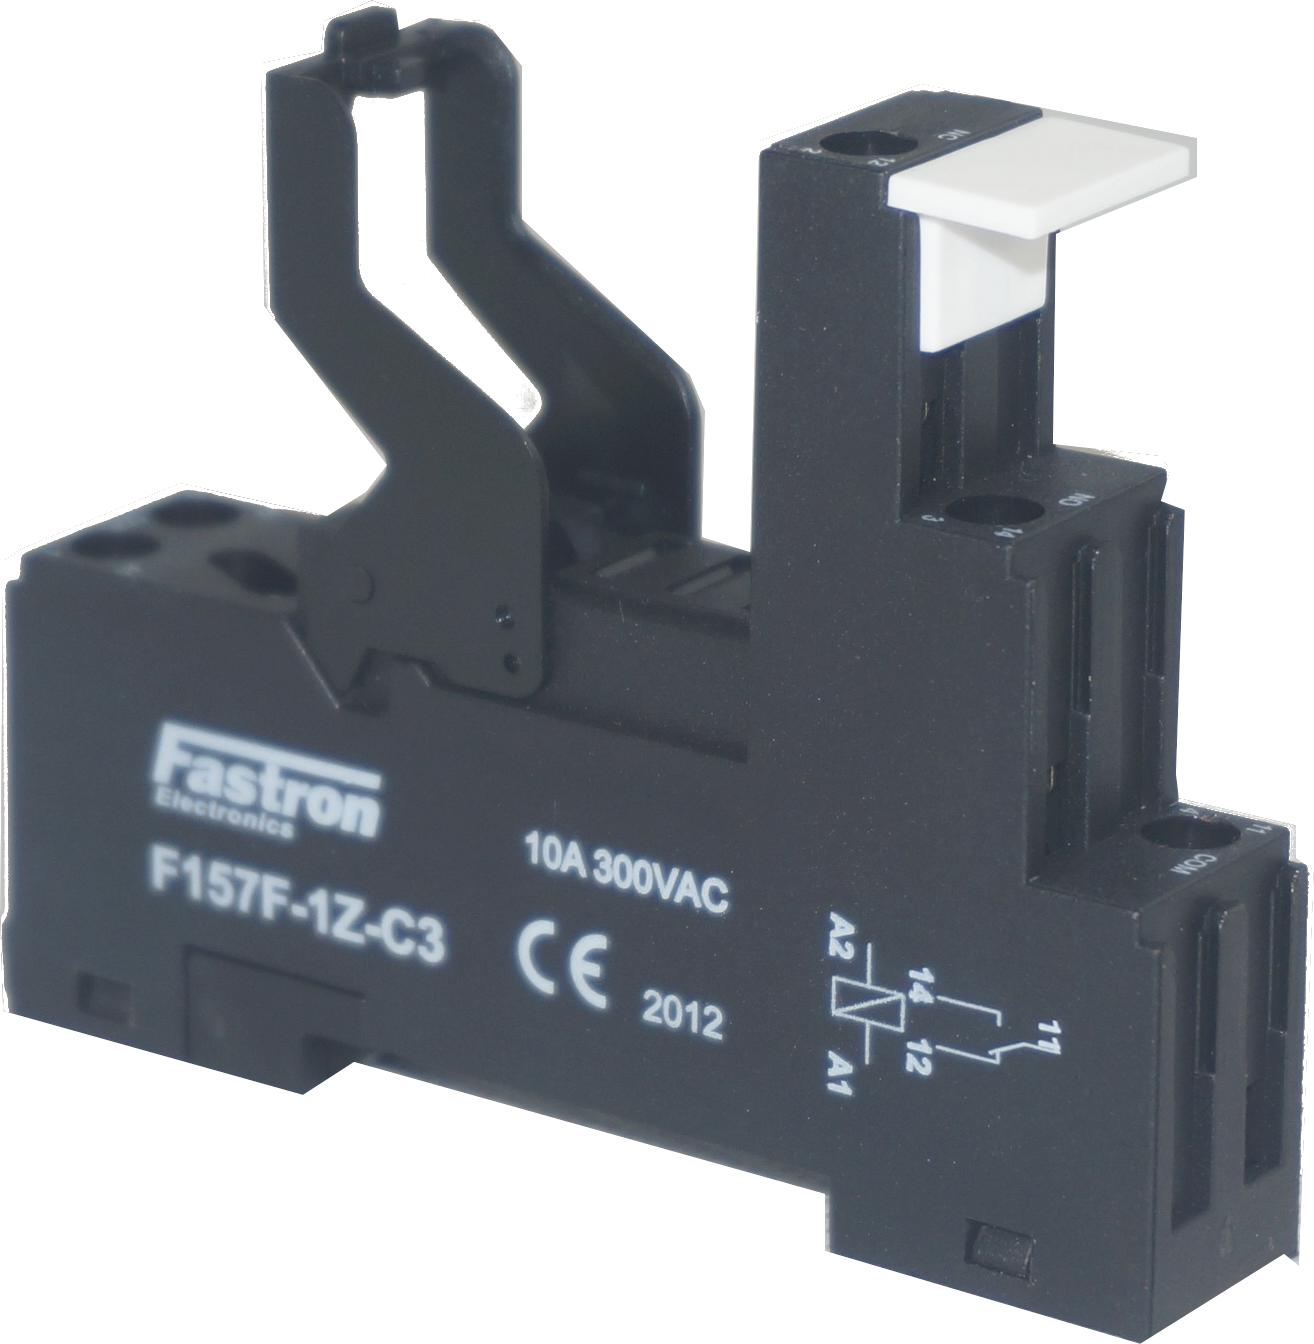 F157F-1Z-C3, 5 Pin Relay Socket, Rated for 1 x SPDT 10/16 Amp, 250VAC/30VDC Load, up to 250VAC Coil-Relay-Fastron Electronics-Fastron Electronics Store